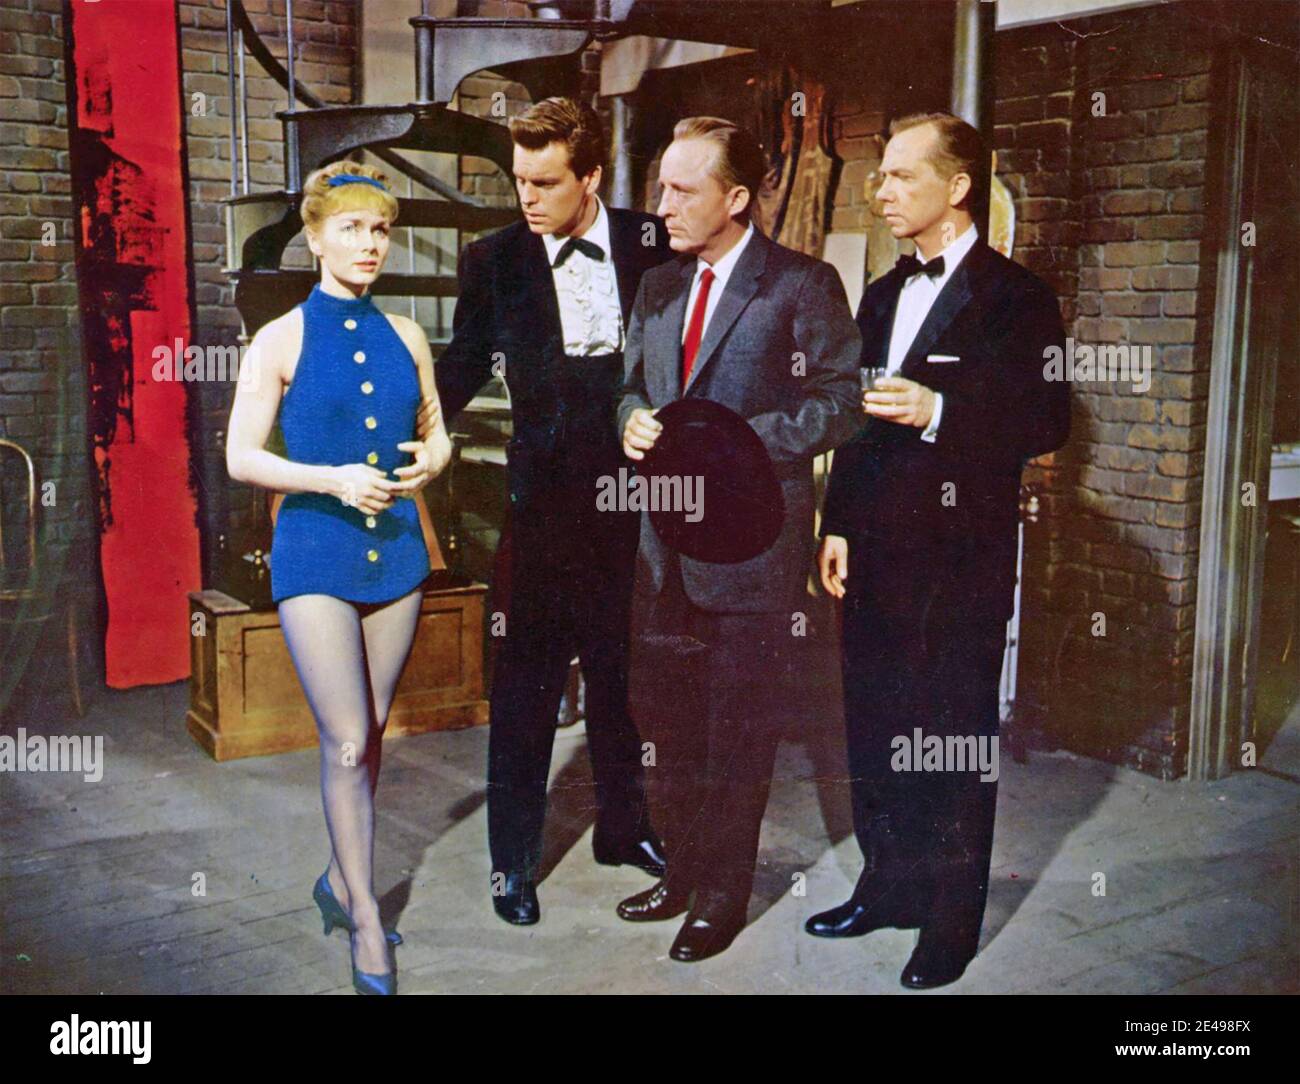 SAY ONE FOR ME 1959 20th Century Fox film with from left: Debbie Reynolds, Robert Wagner,  Bing Crosby, Ray Walston Stock Photo